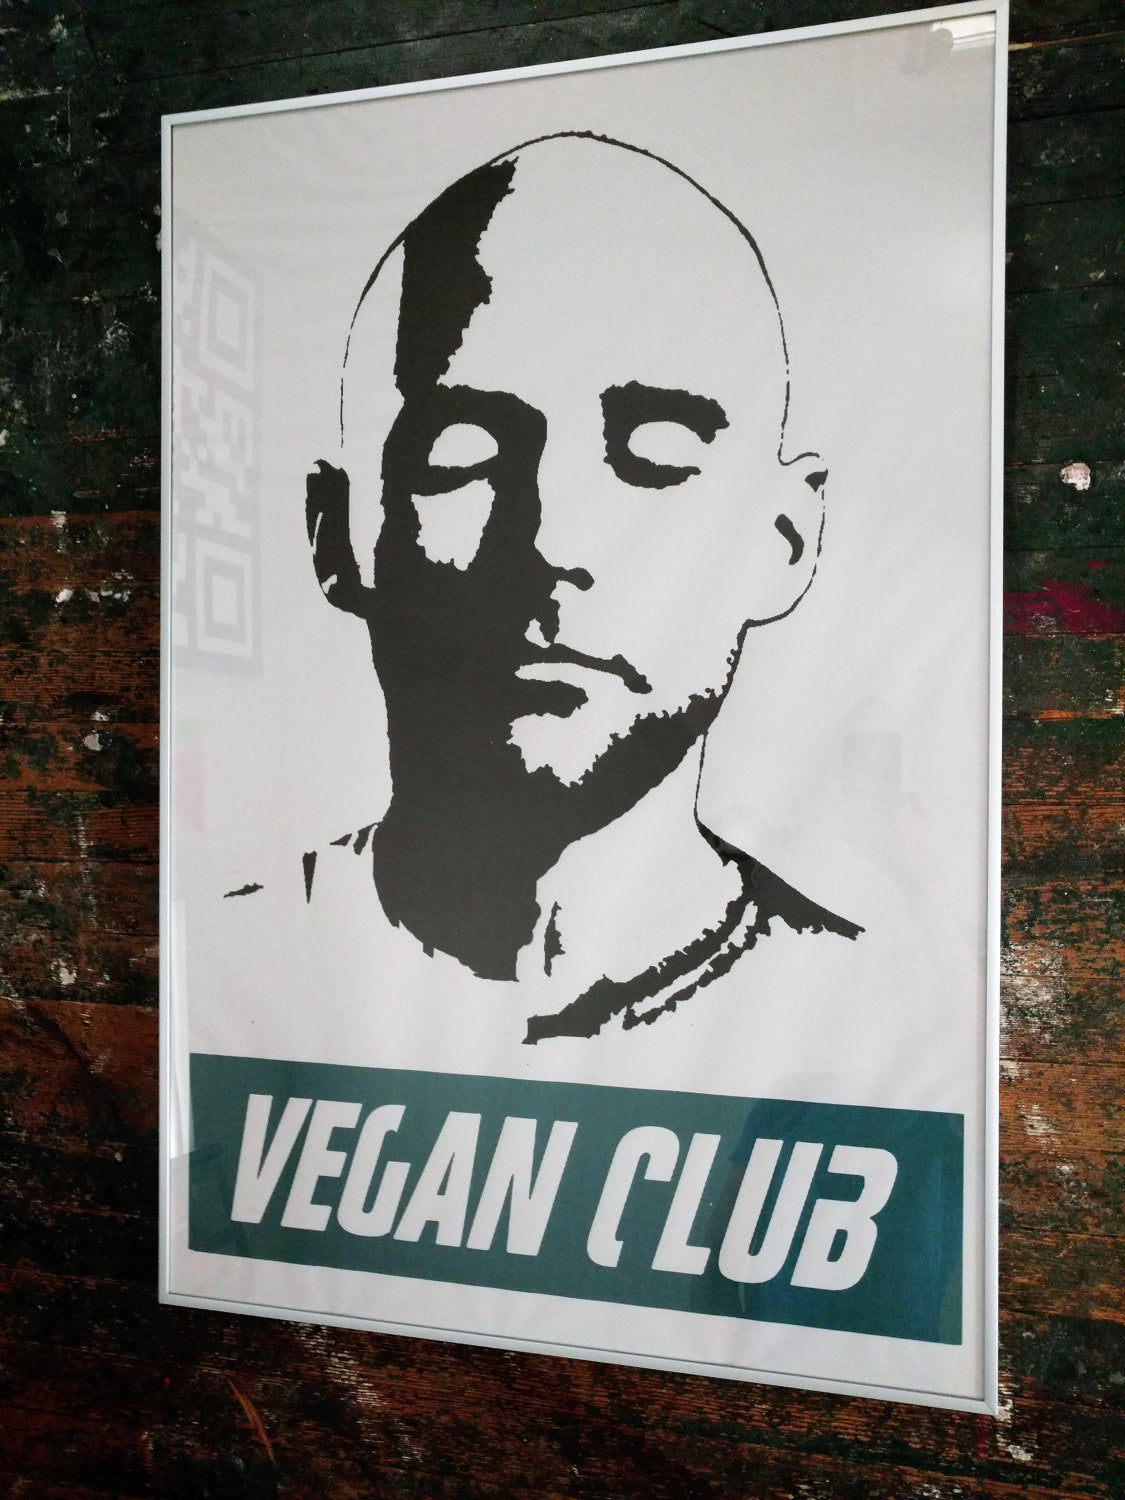 Framed on metal Street Art NewsPrint Poster 24x36 Vegan Club featuring Moby signed by LeFou